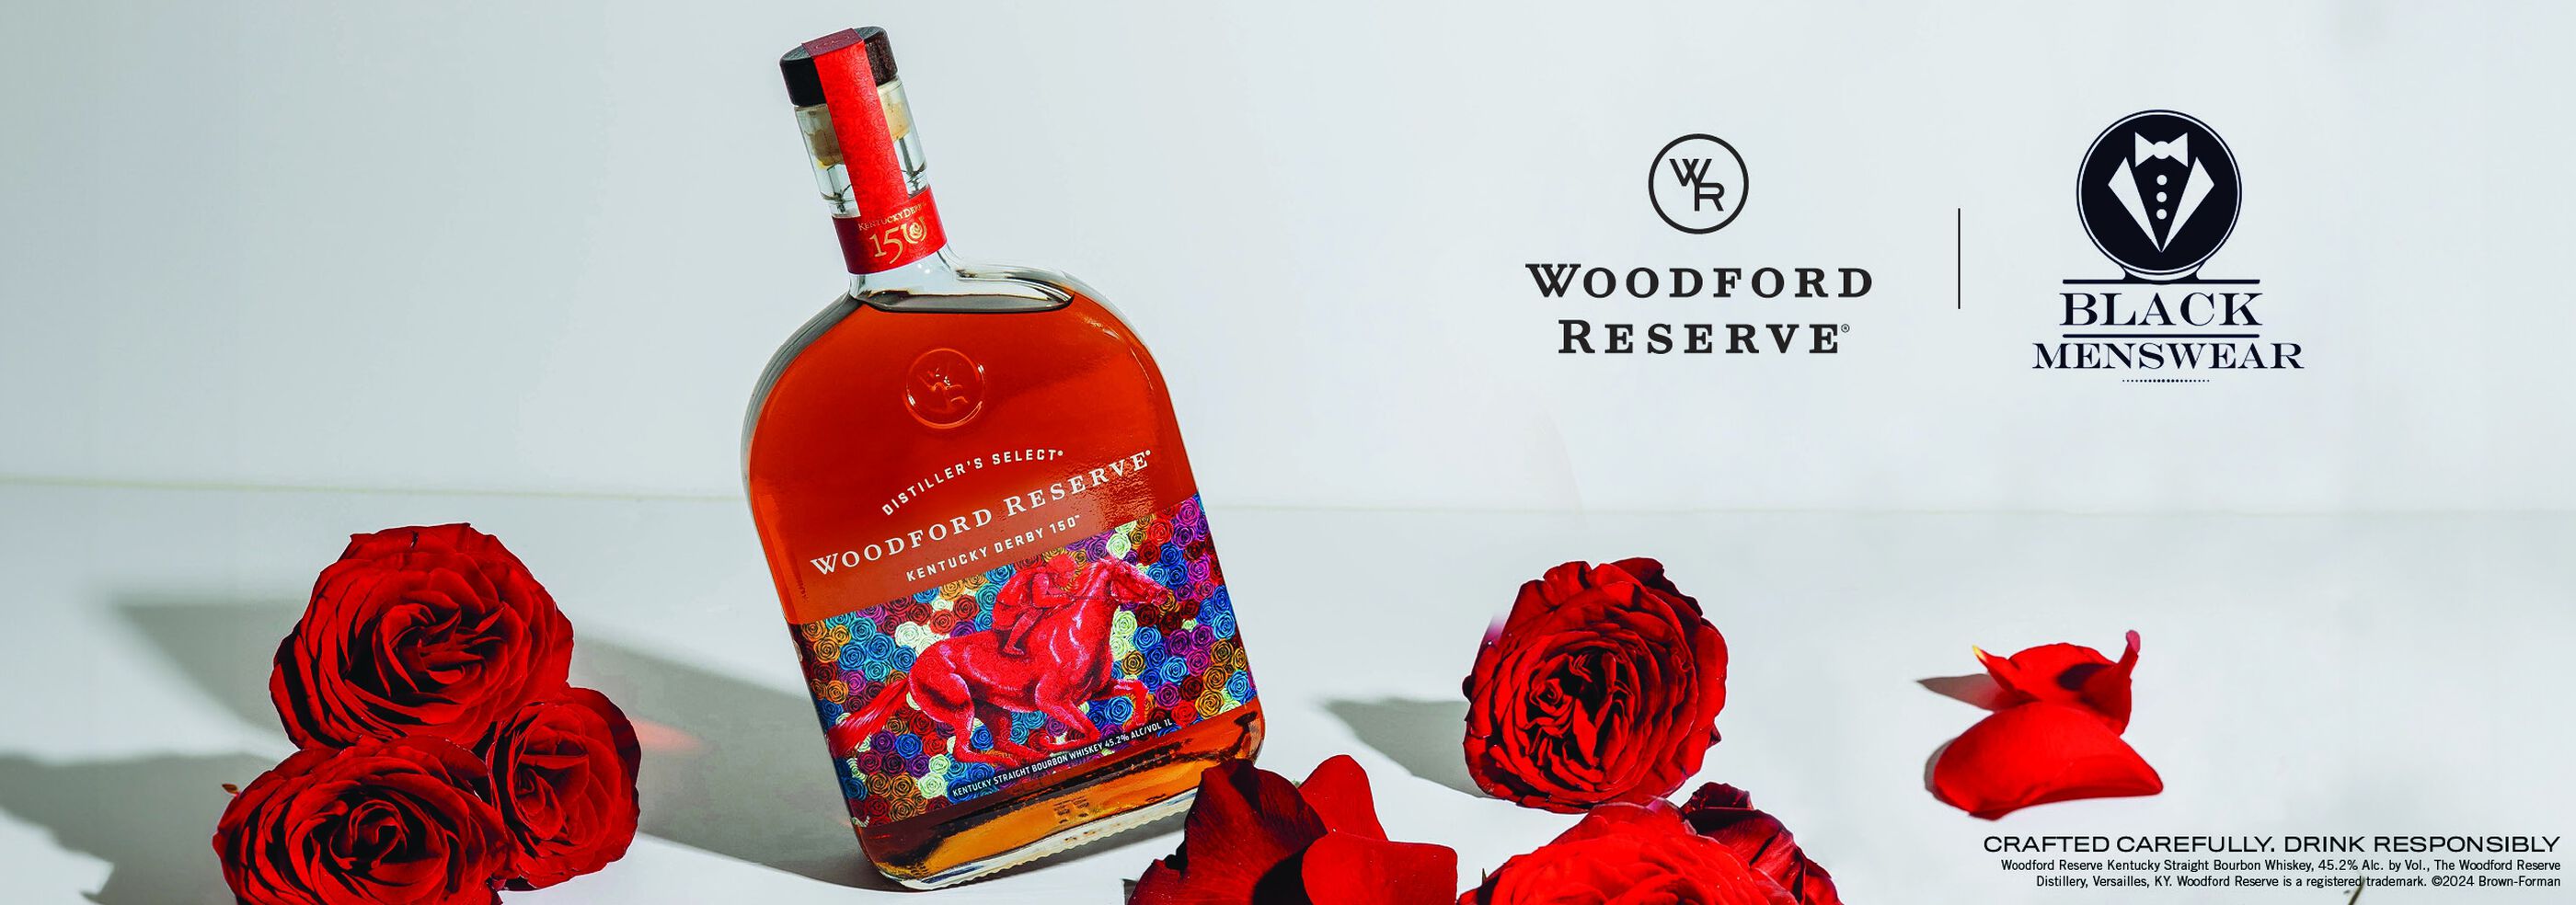 Woodford Reserve 2024 Kentucky Derby Bottle with some roses and Black Menswear logo